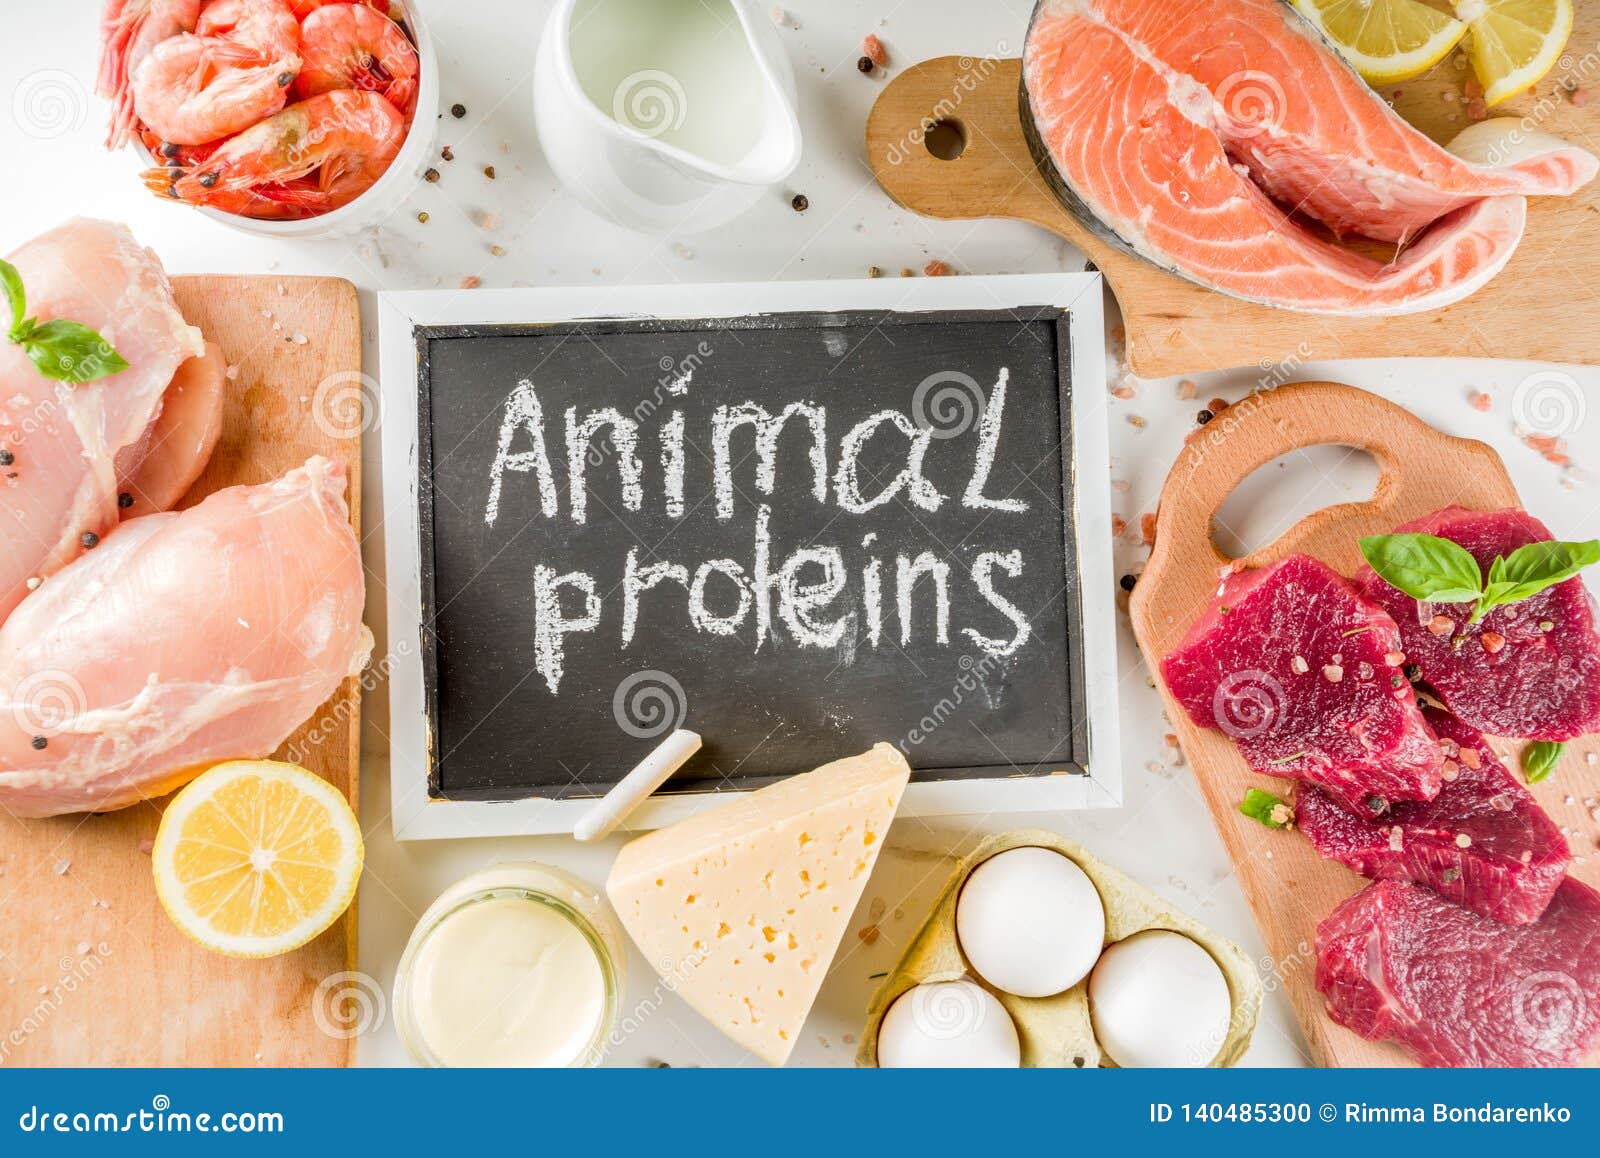 Animal protein sources stock photo. Image of dieting - 140485300